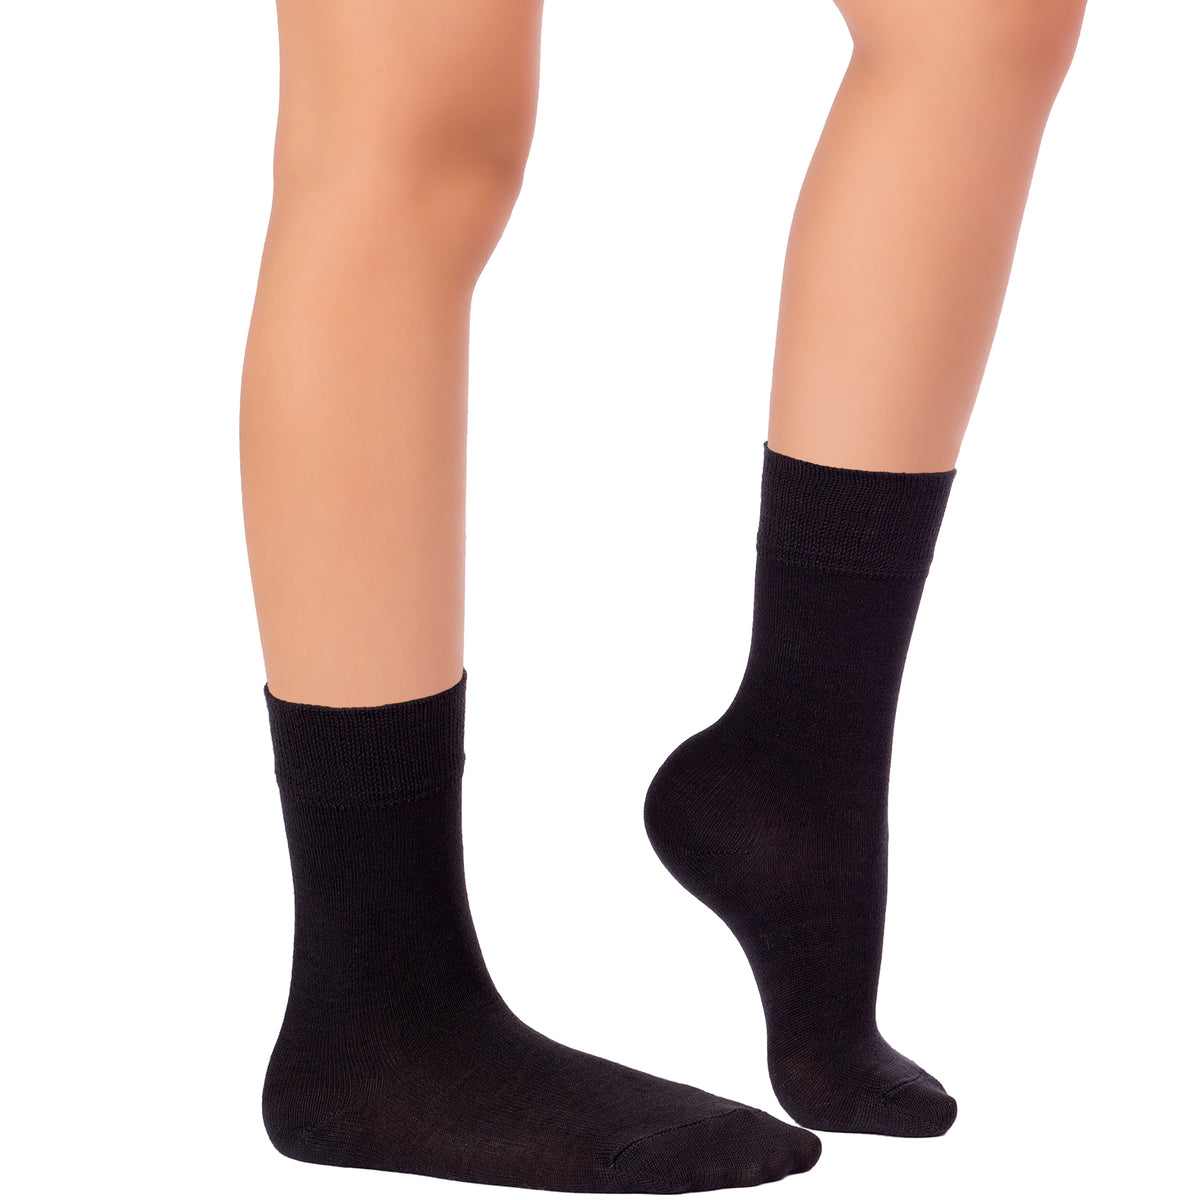 This image depicts a woman's legs adorned in black socks against a white background. The socks are the 'Kids' Dress Crew Bamboo' variety.